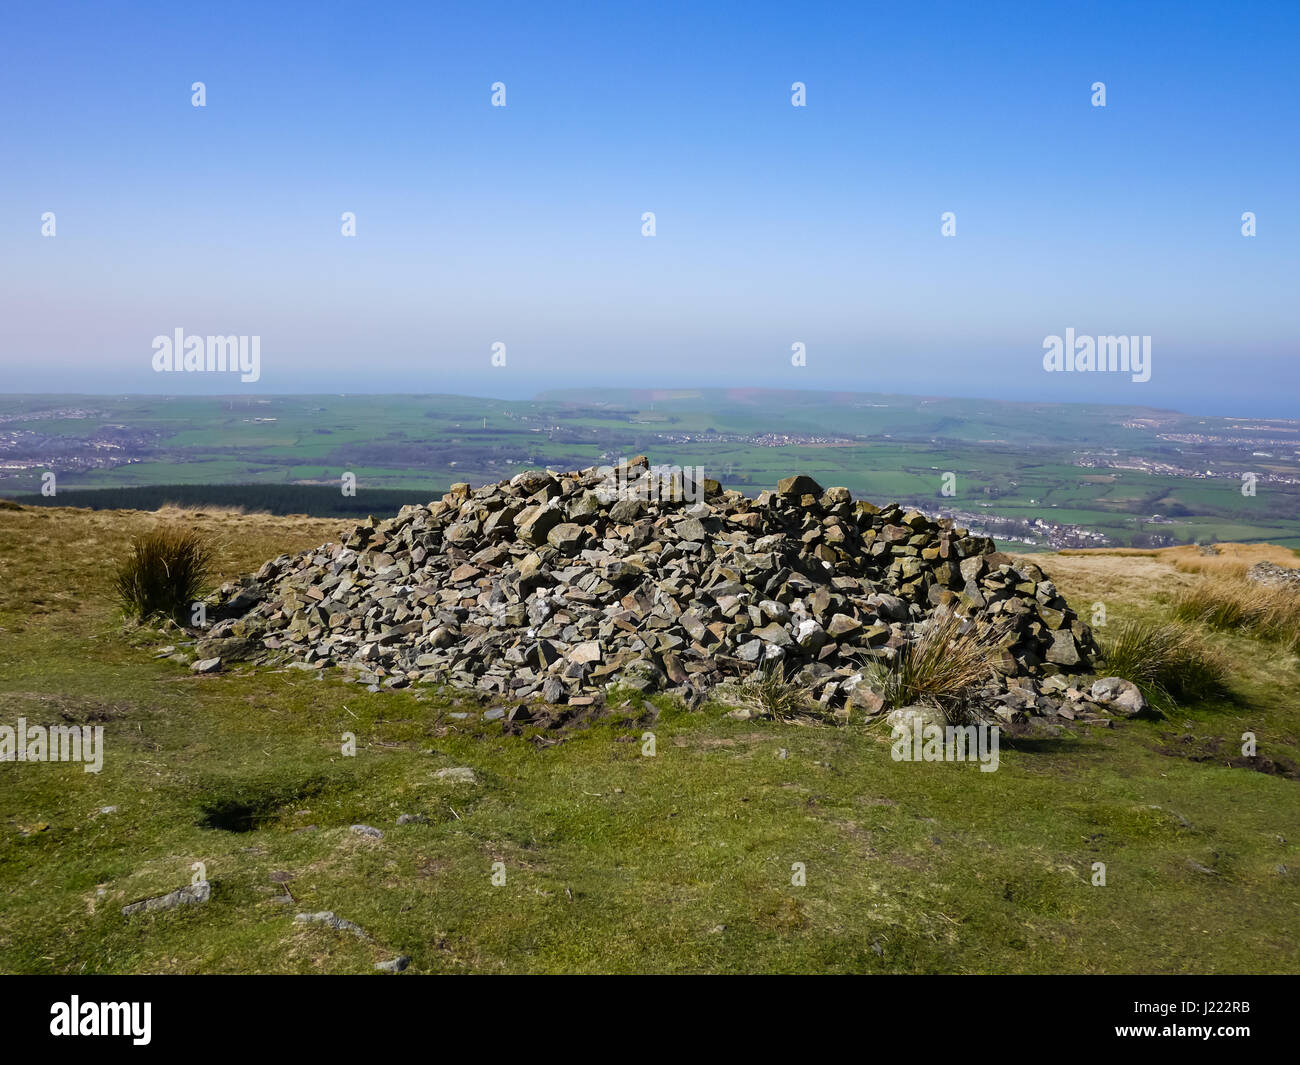 The large Cairn at the summit of Dent Fell, the first fell on the coast to coast walking route, Cumbria, Uk Stock Photo